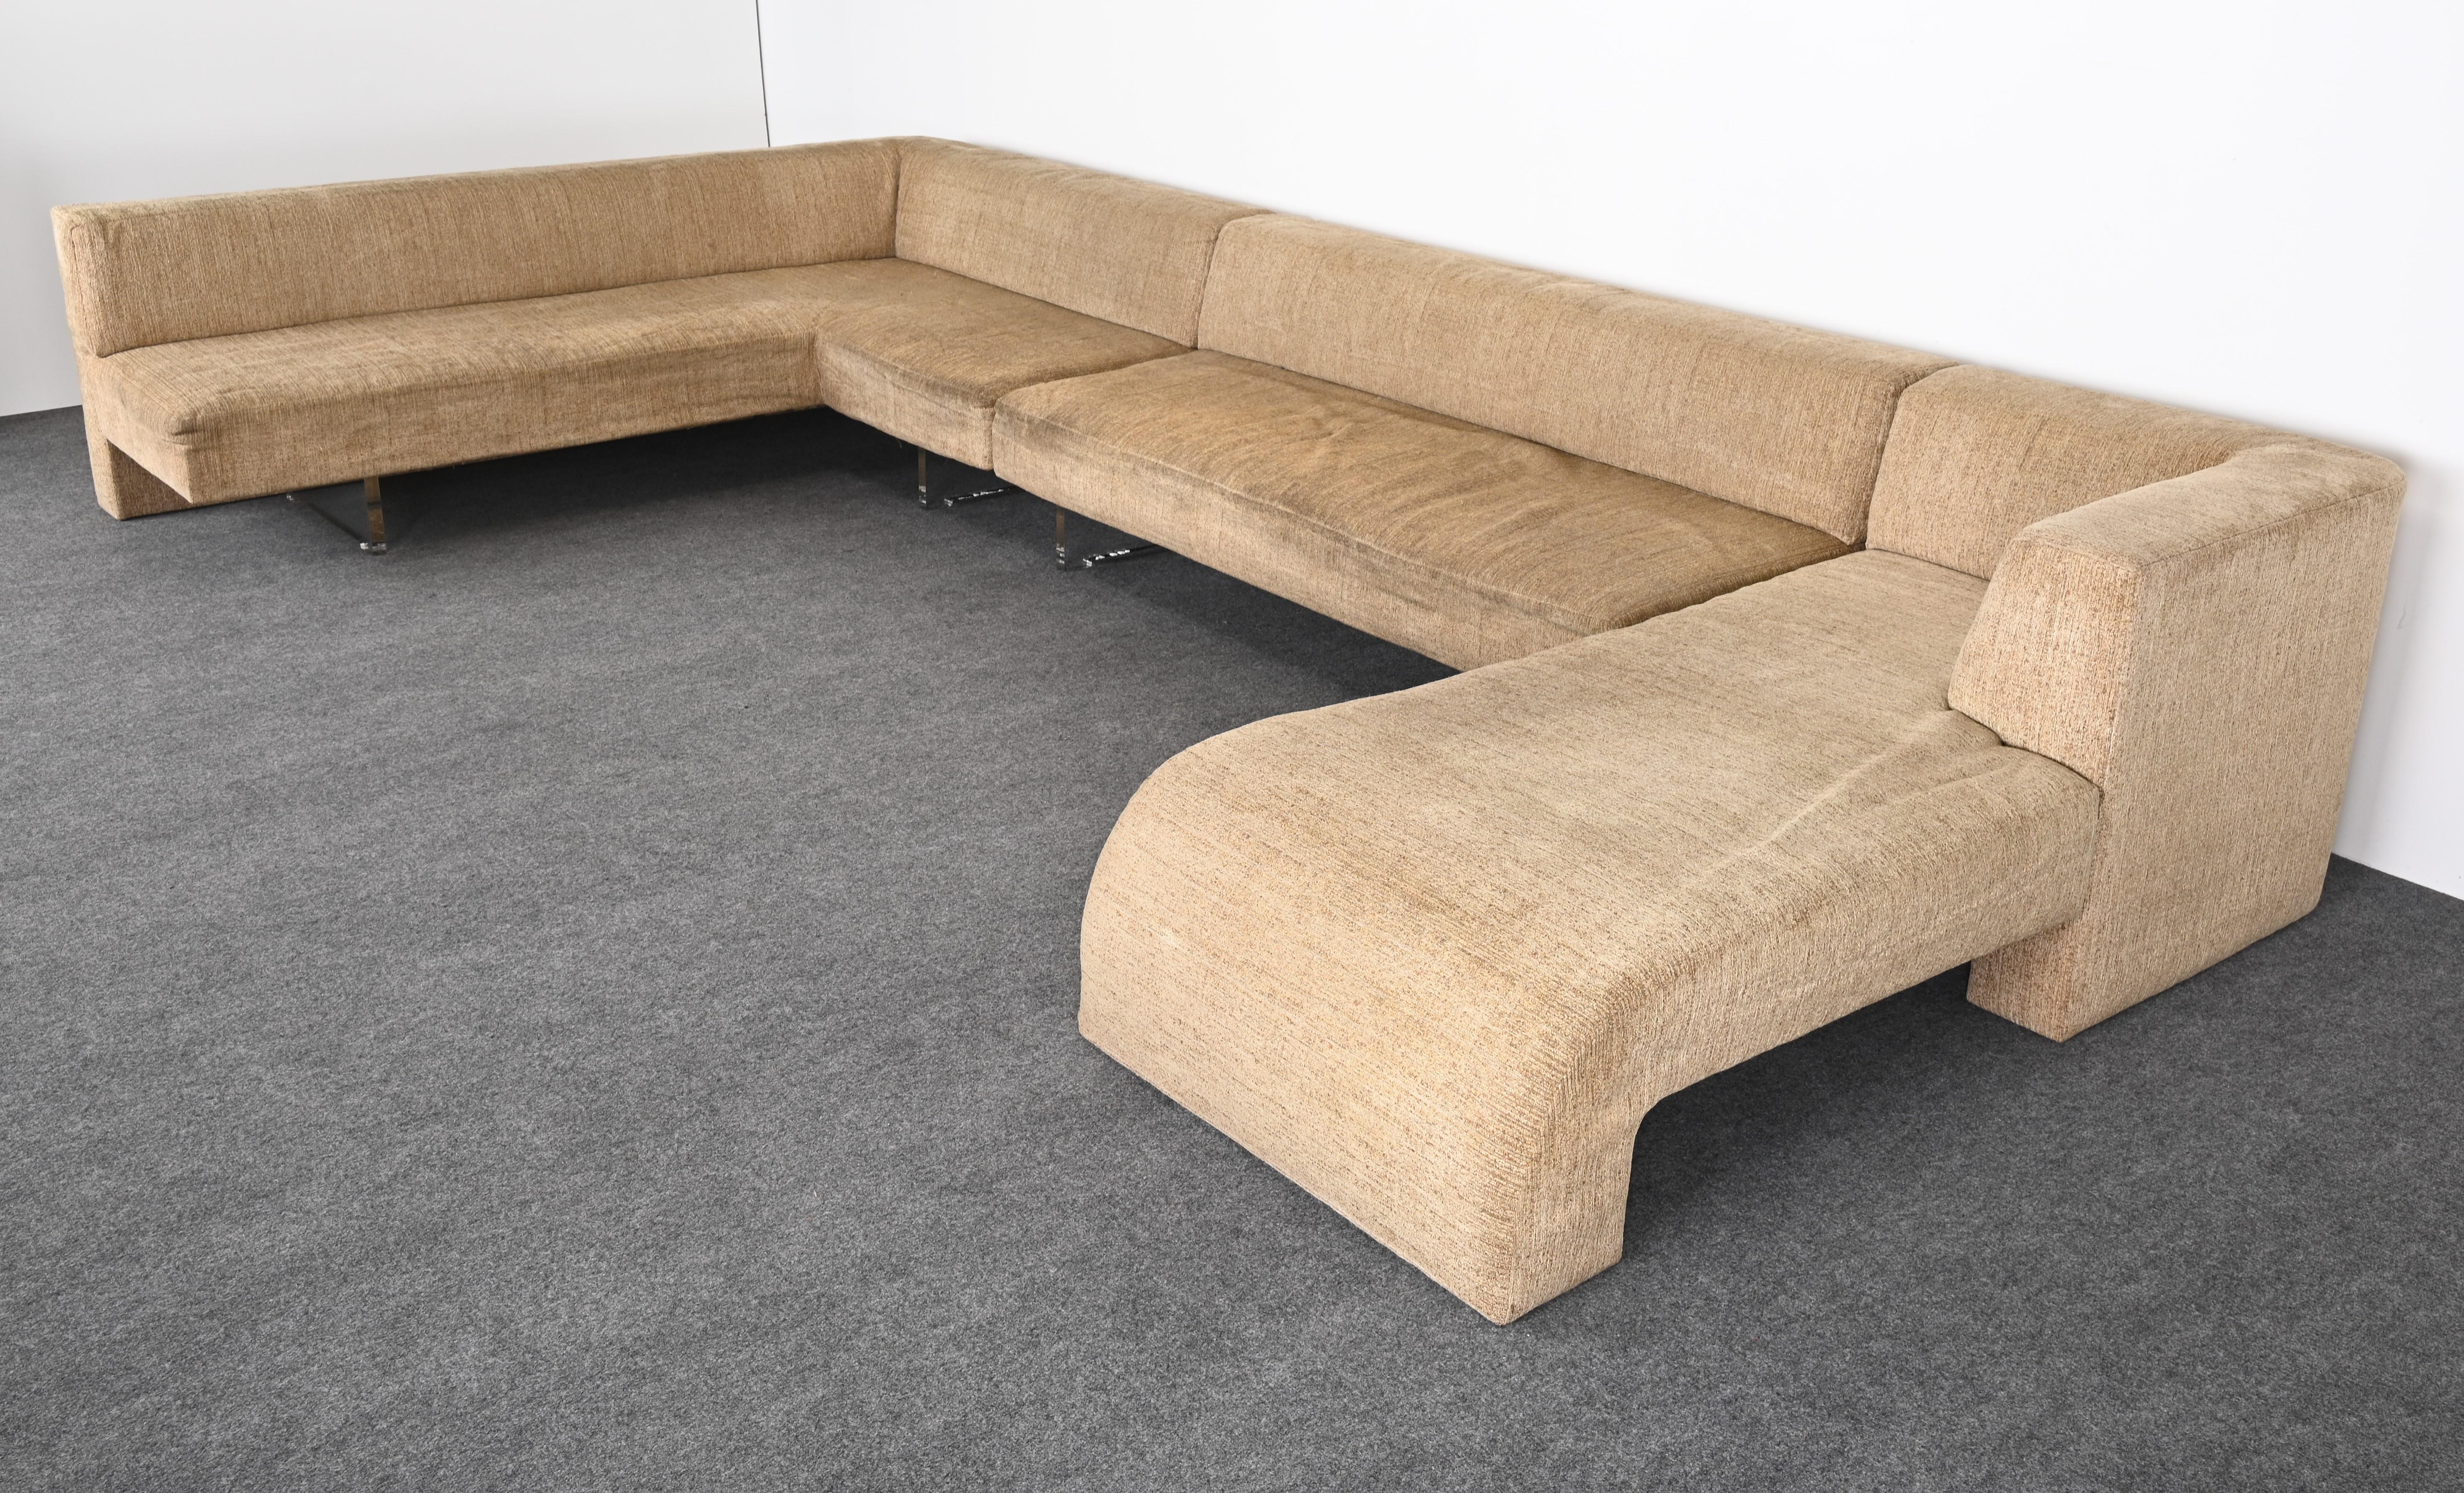 Monumental Sectional Sofa Designed by Vladimir Kagan, 1970s For Sale 5